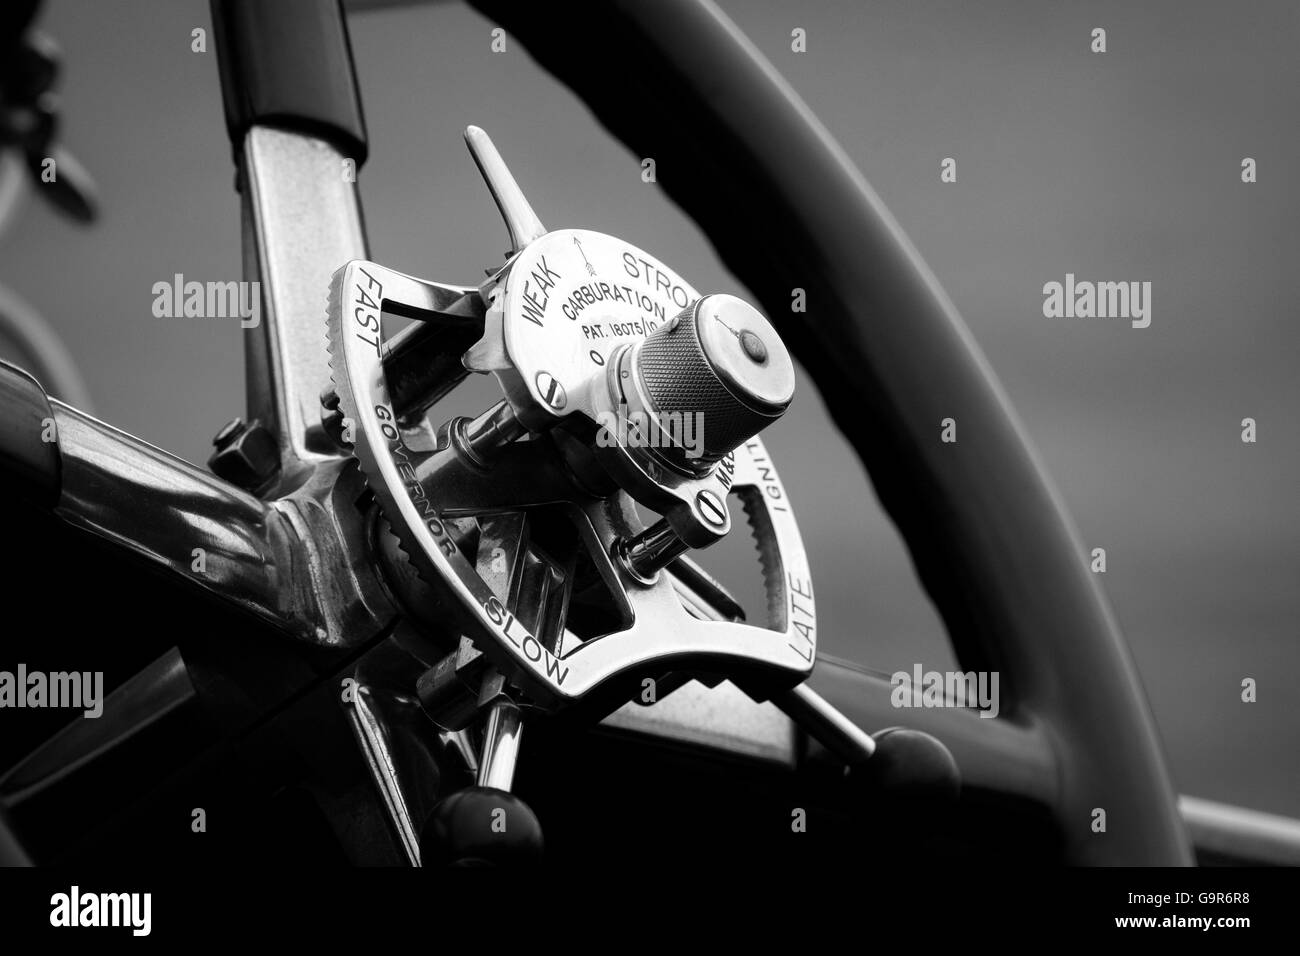 Steering wheel controls of a vintage Rolls Royce Car in Black & White Stock Photo